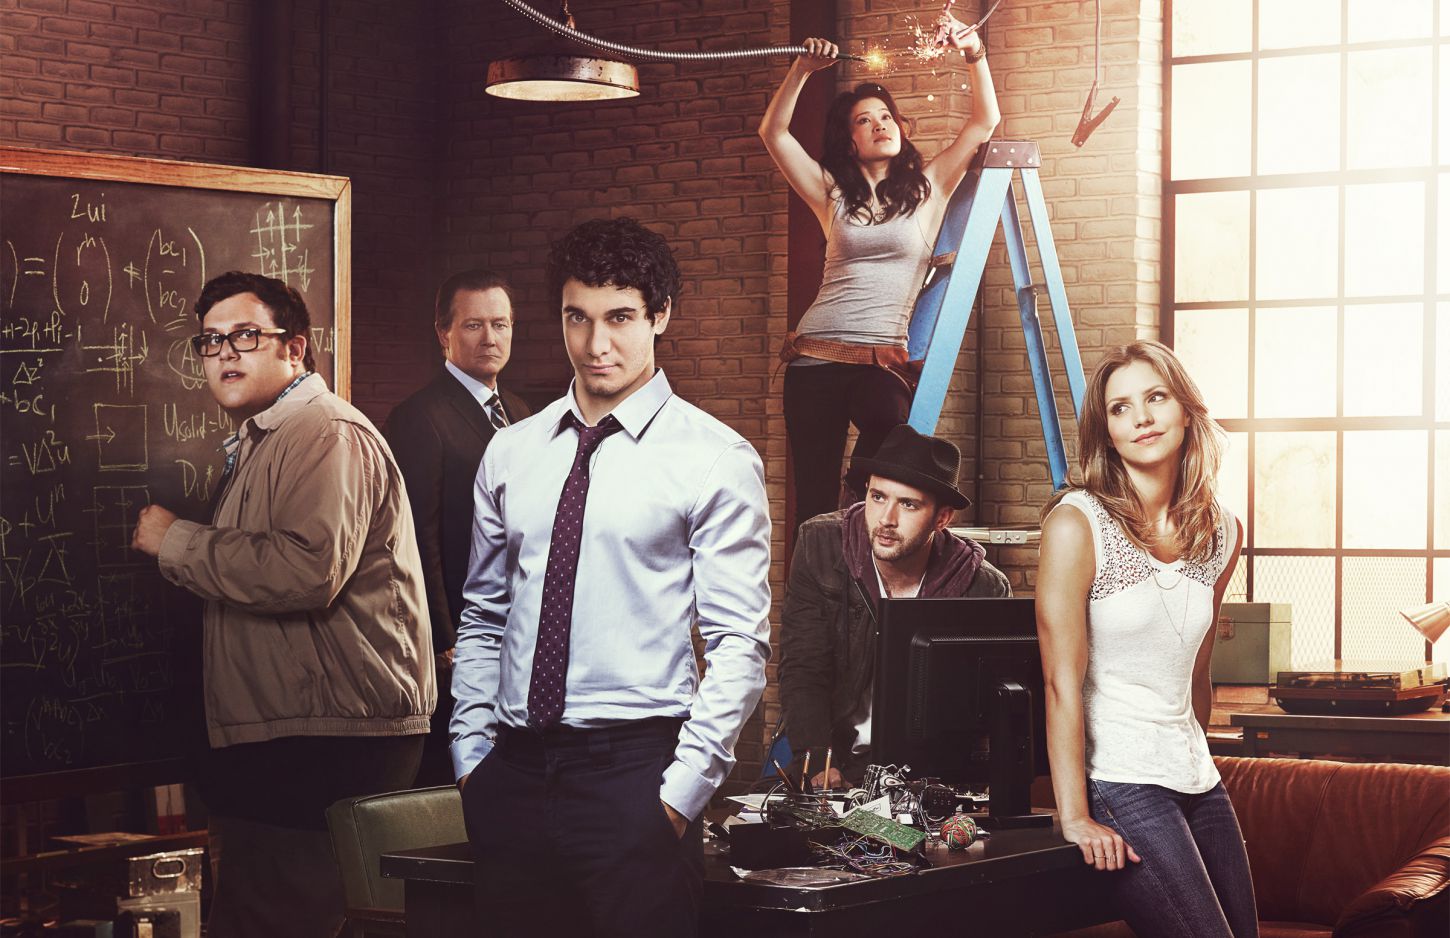 Geek insider, geekinsider, geekinsider. Com,, cbs series 'scorpion' is worth the watch, entertainment